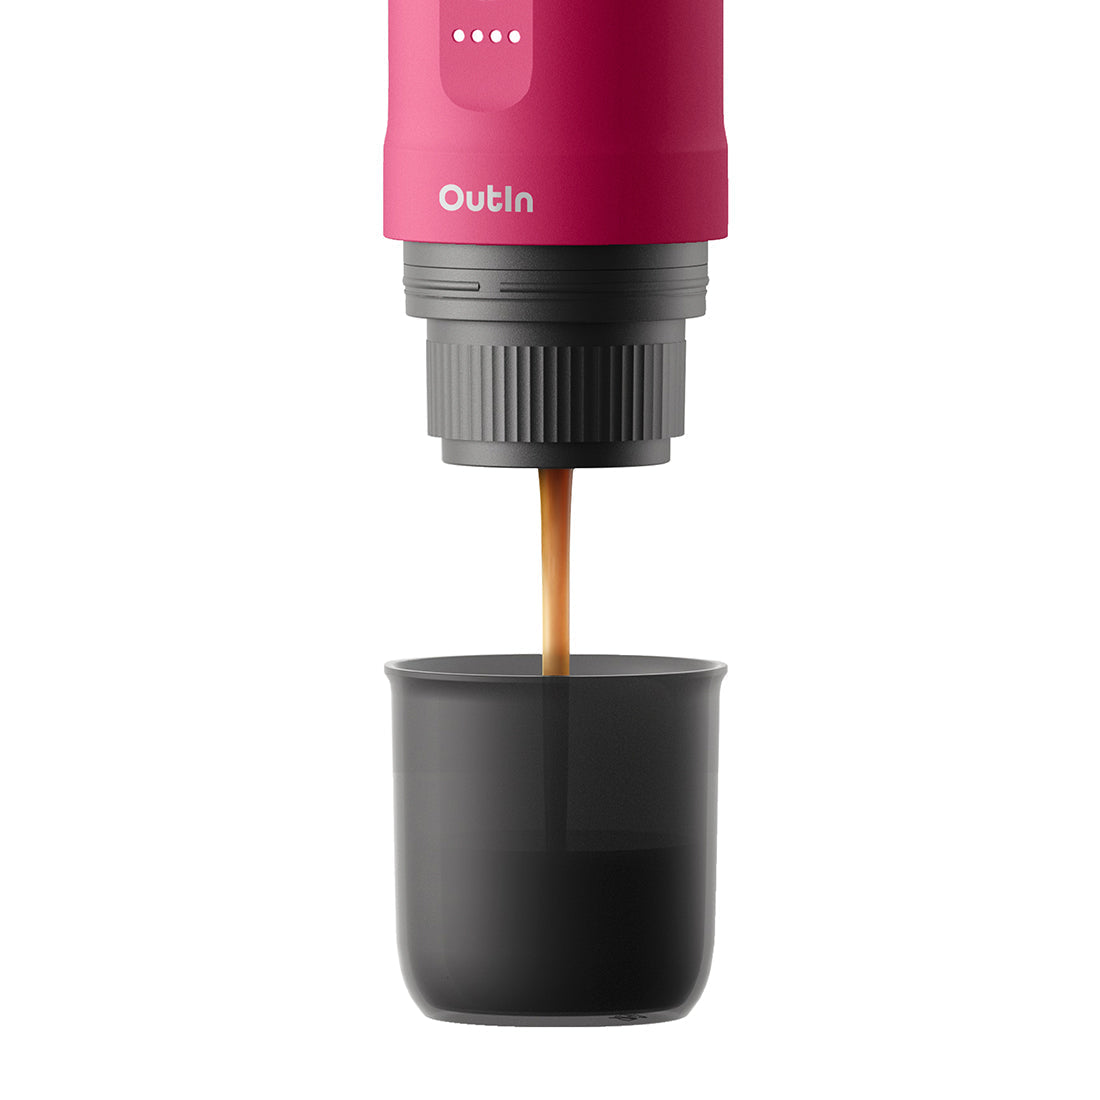 This Portable Espresso Maker Is the Perfect Last-Minute Gift for